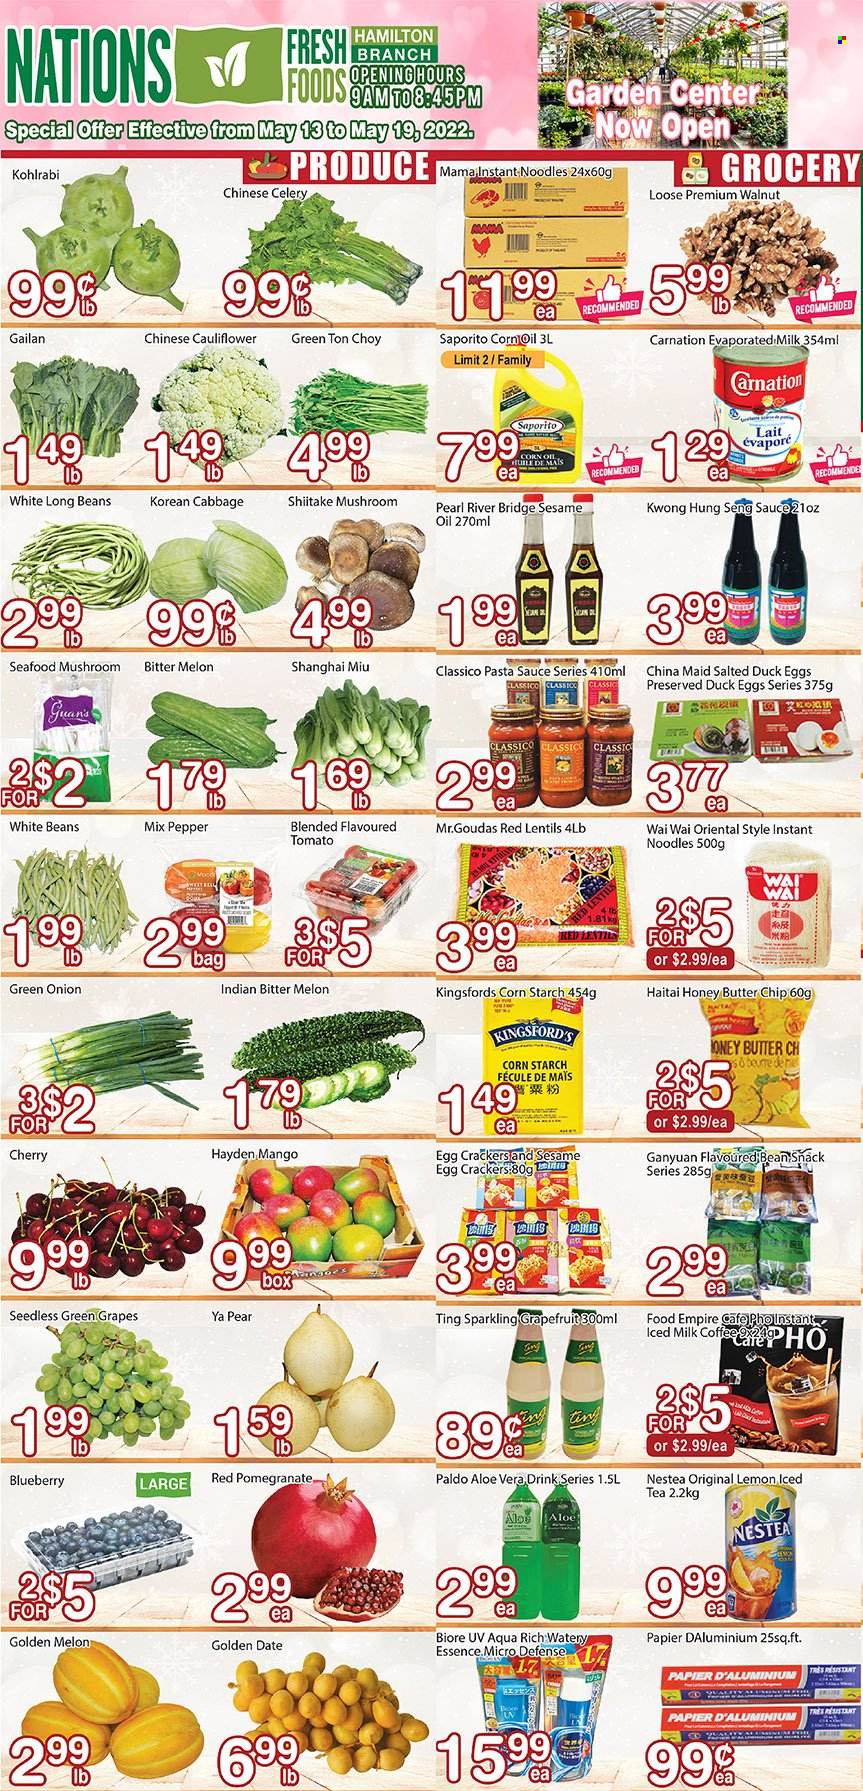 thumbnail - Nations Fresh Foods Flyer - May 13, 2022 - May 19, 2022 - Sales products - mushrooms, cabbage, celery, onion, green onion, grapefruits, grapes, mango, cherries, pears, melons, pomegranate, seafood, pasta sauce, instant noodles, sauce, noodles, milk, eggs, butter, crackers, lentils, red lentils, pepper, Classico, sesame oil, oil, honey, ice tea, coffee, kohlrabi. Page 1.